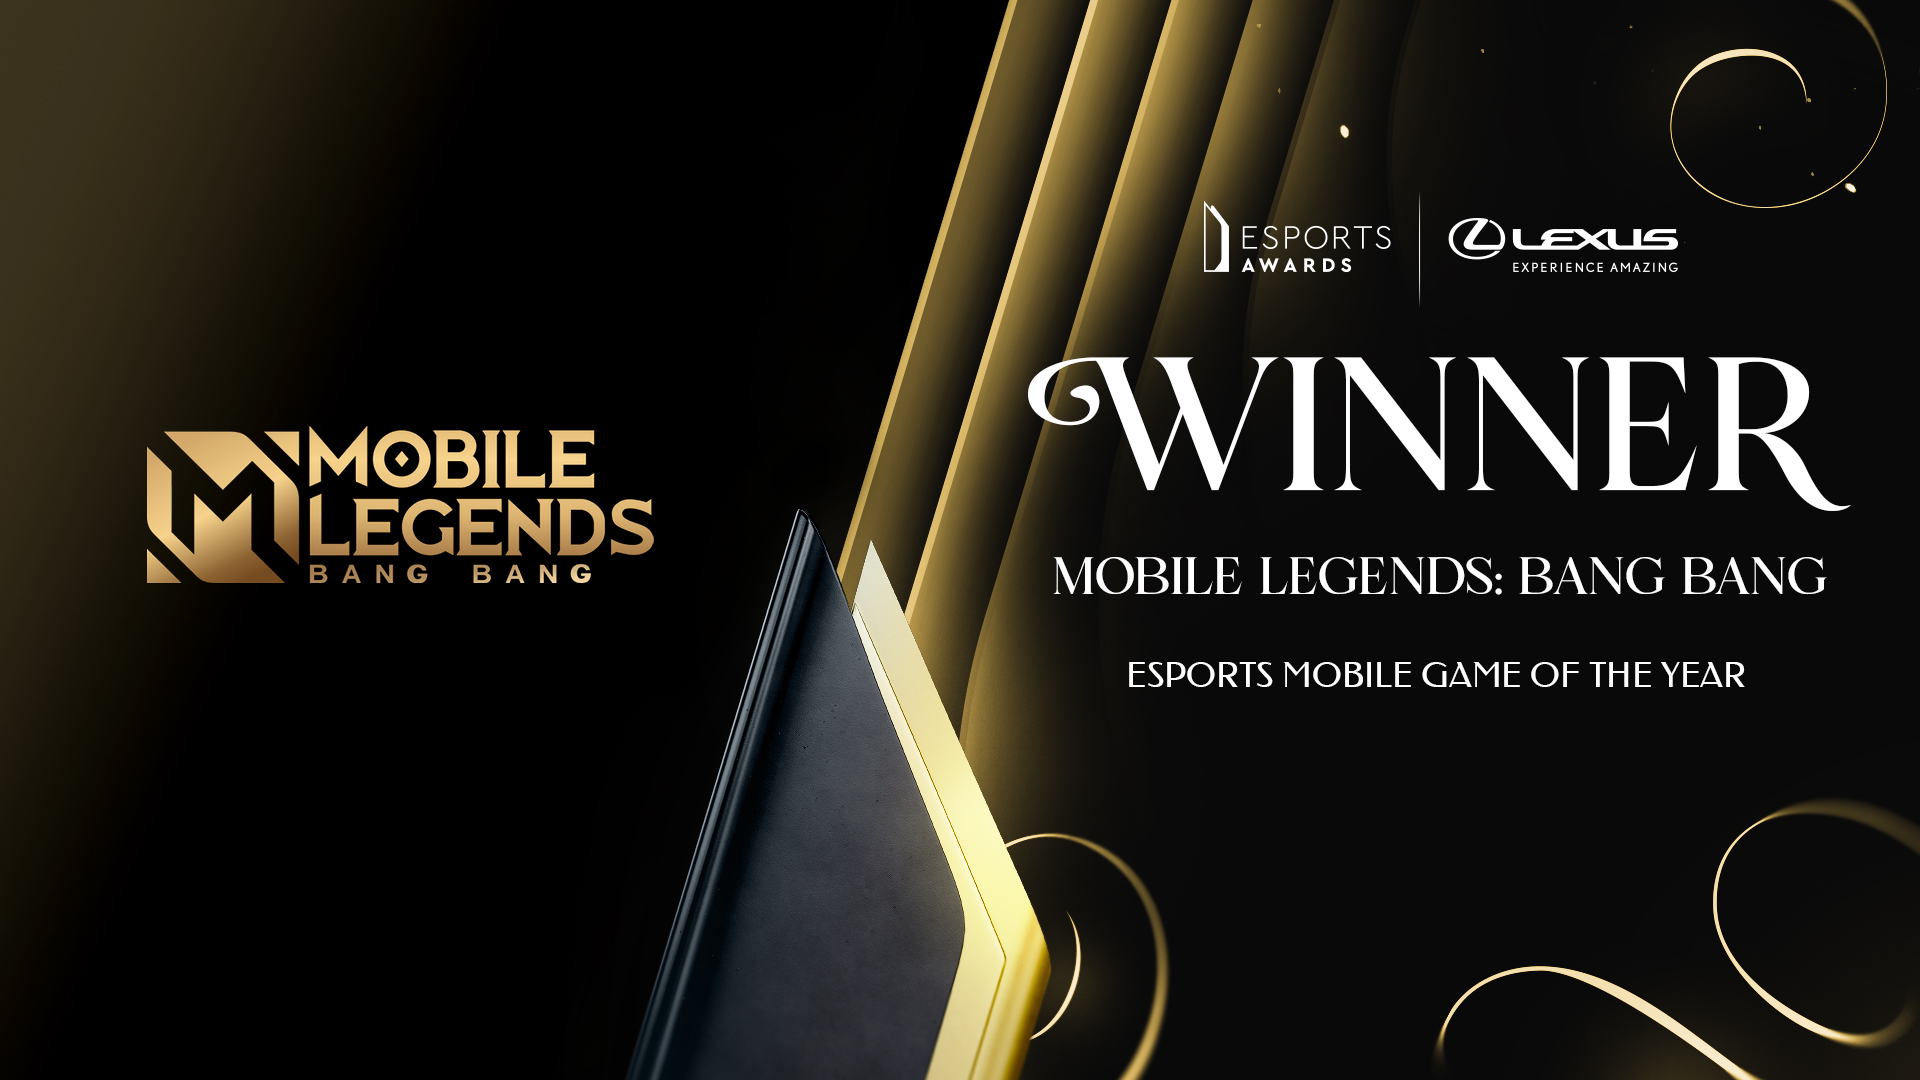 Esports Mobile Game of the Year: Mobile Legends